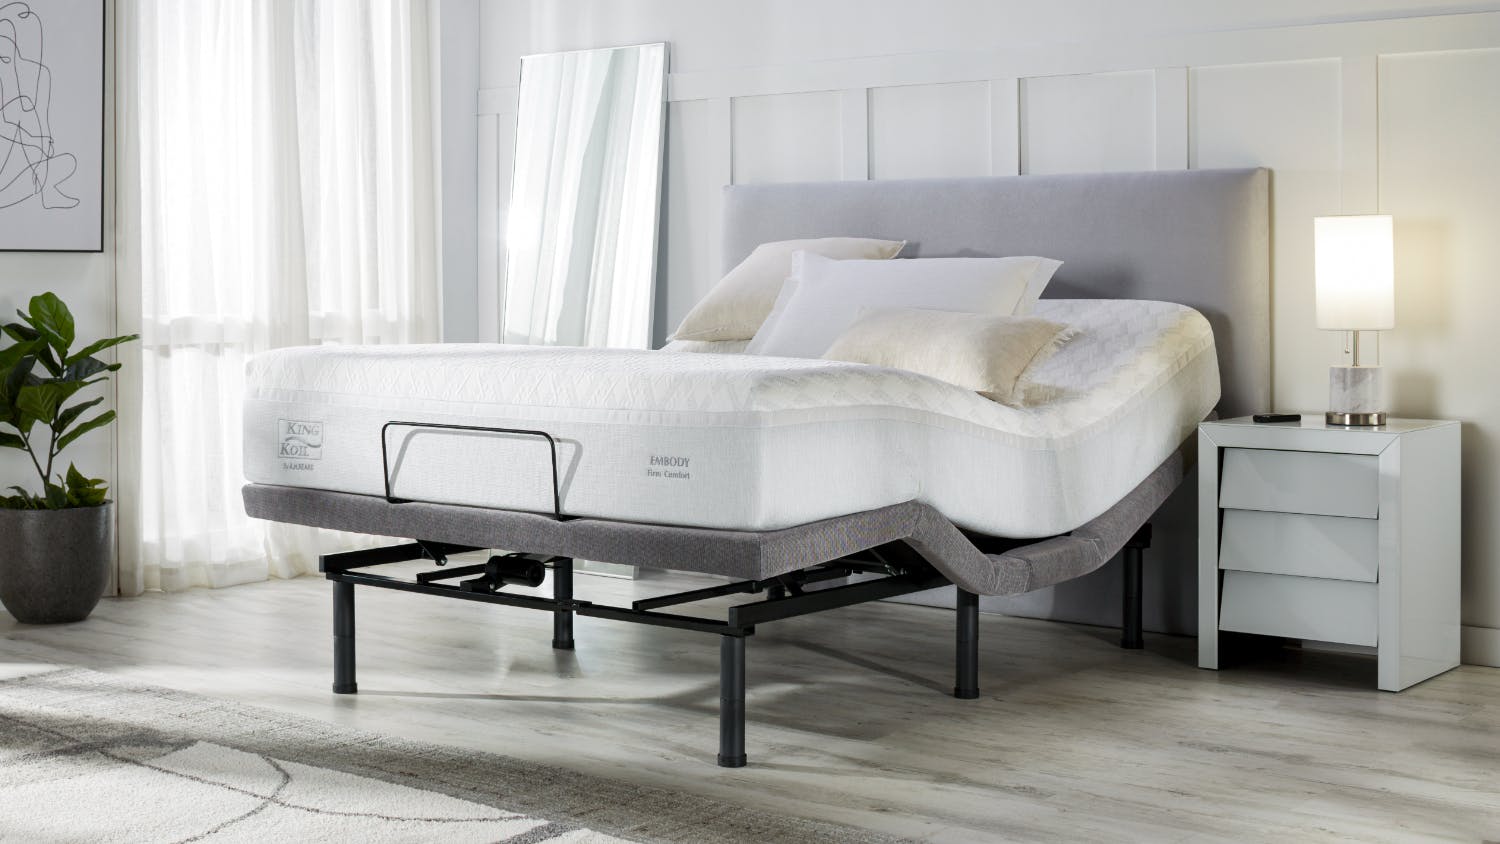 King Coil Embody Firm Queen Mattress with Renew Zero Clearance Dark Grey Adjustable Base by A.H Beard